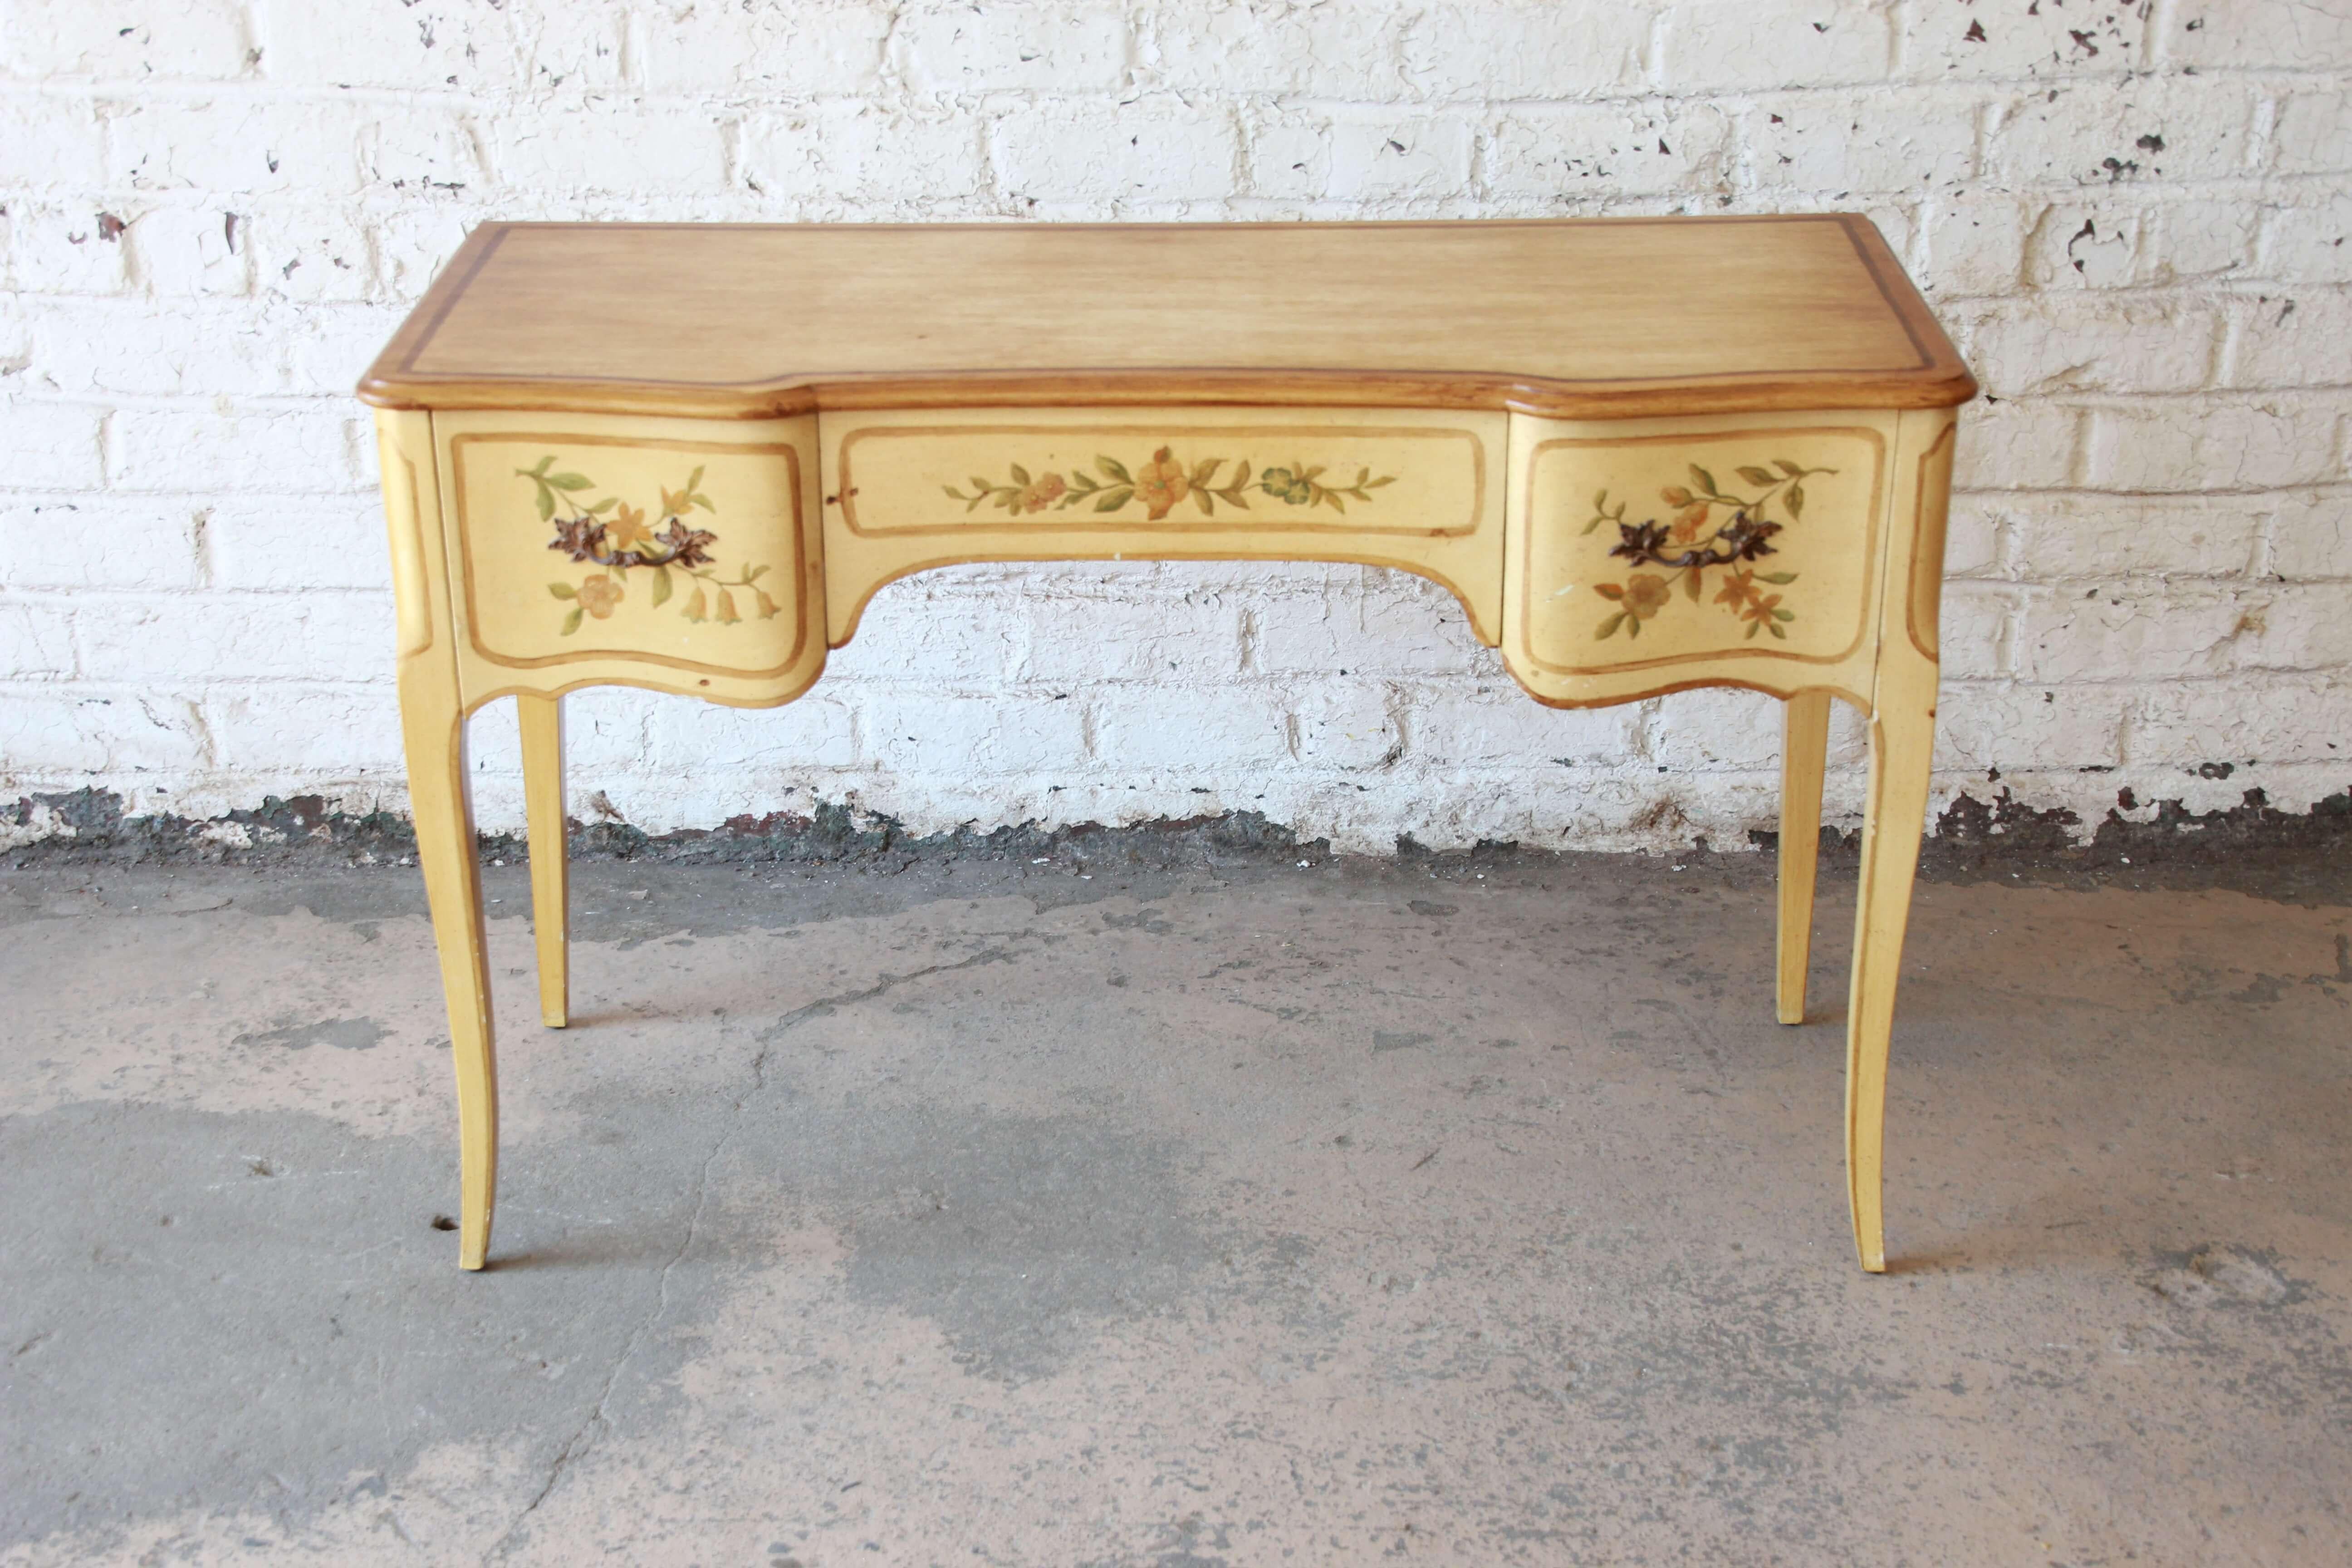 Offering a beautiful painted French writing desk or vanity by John Widdicomb. The desk features classic French design with two large drawers on each end and a long center drawer. Drawer have floral accent paints and all open and close smoothly. The